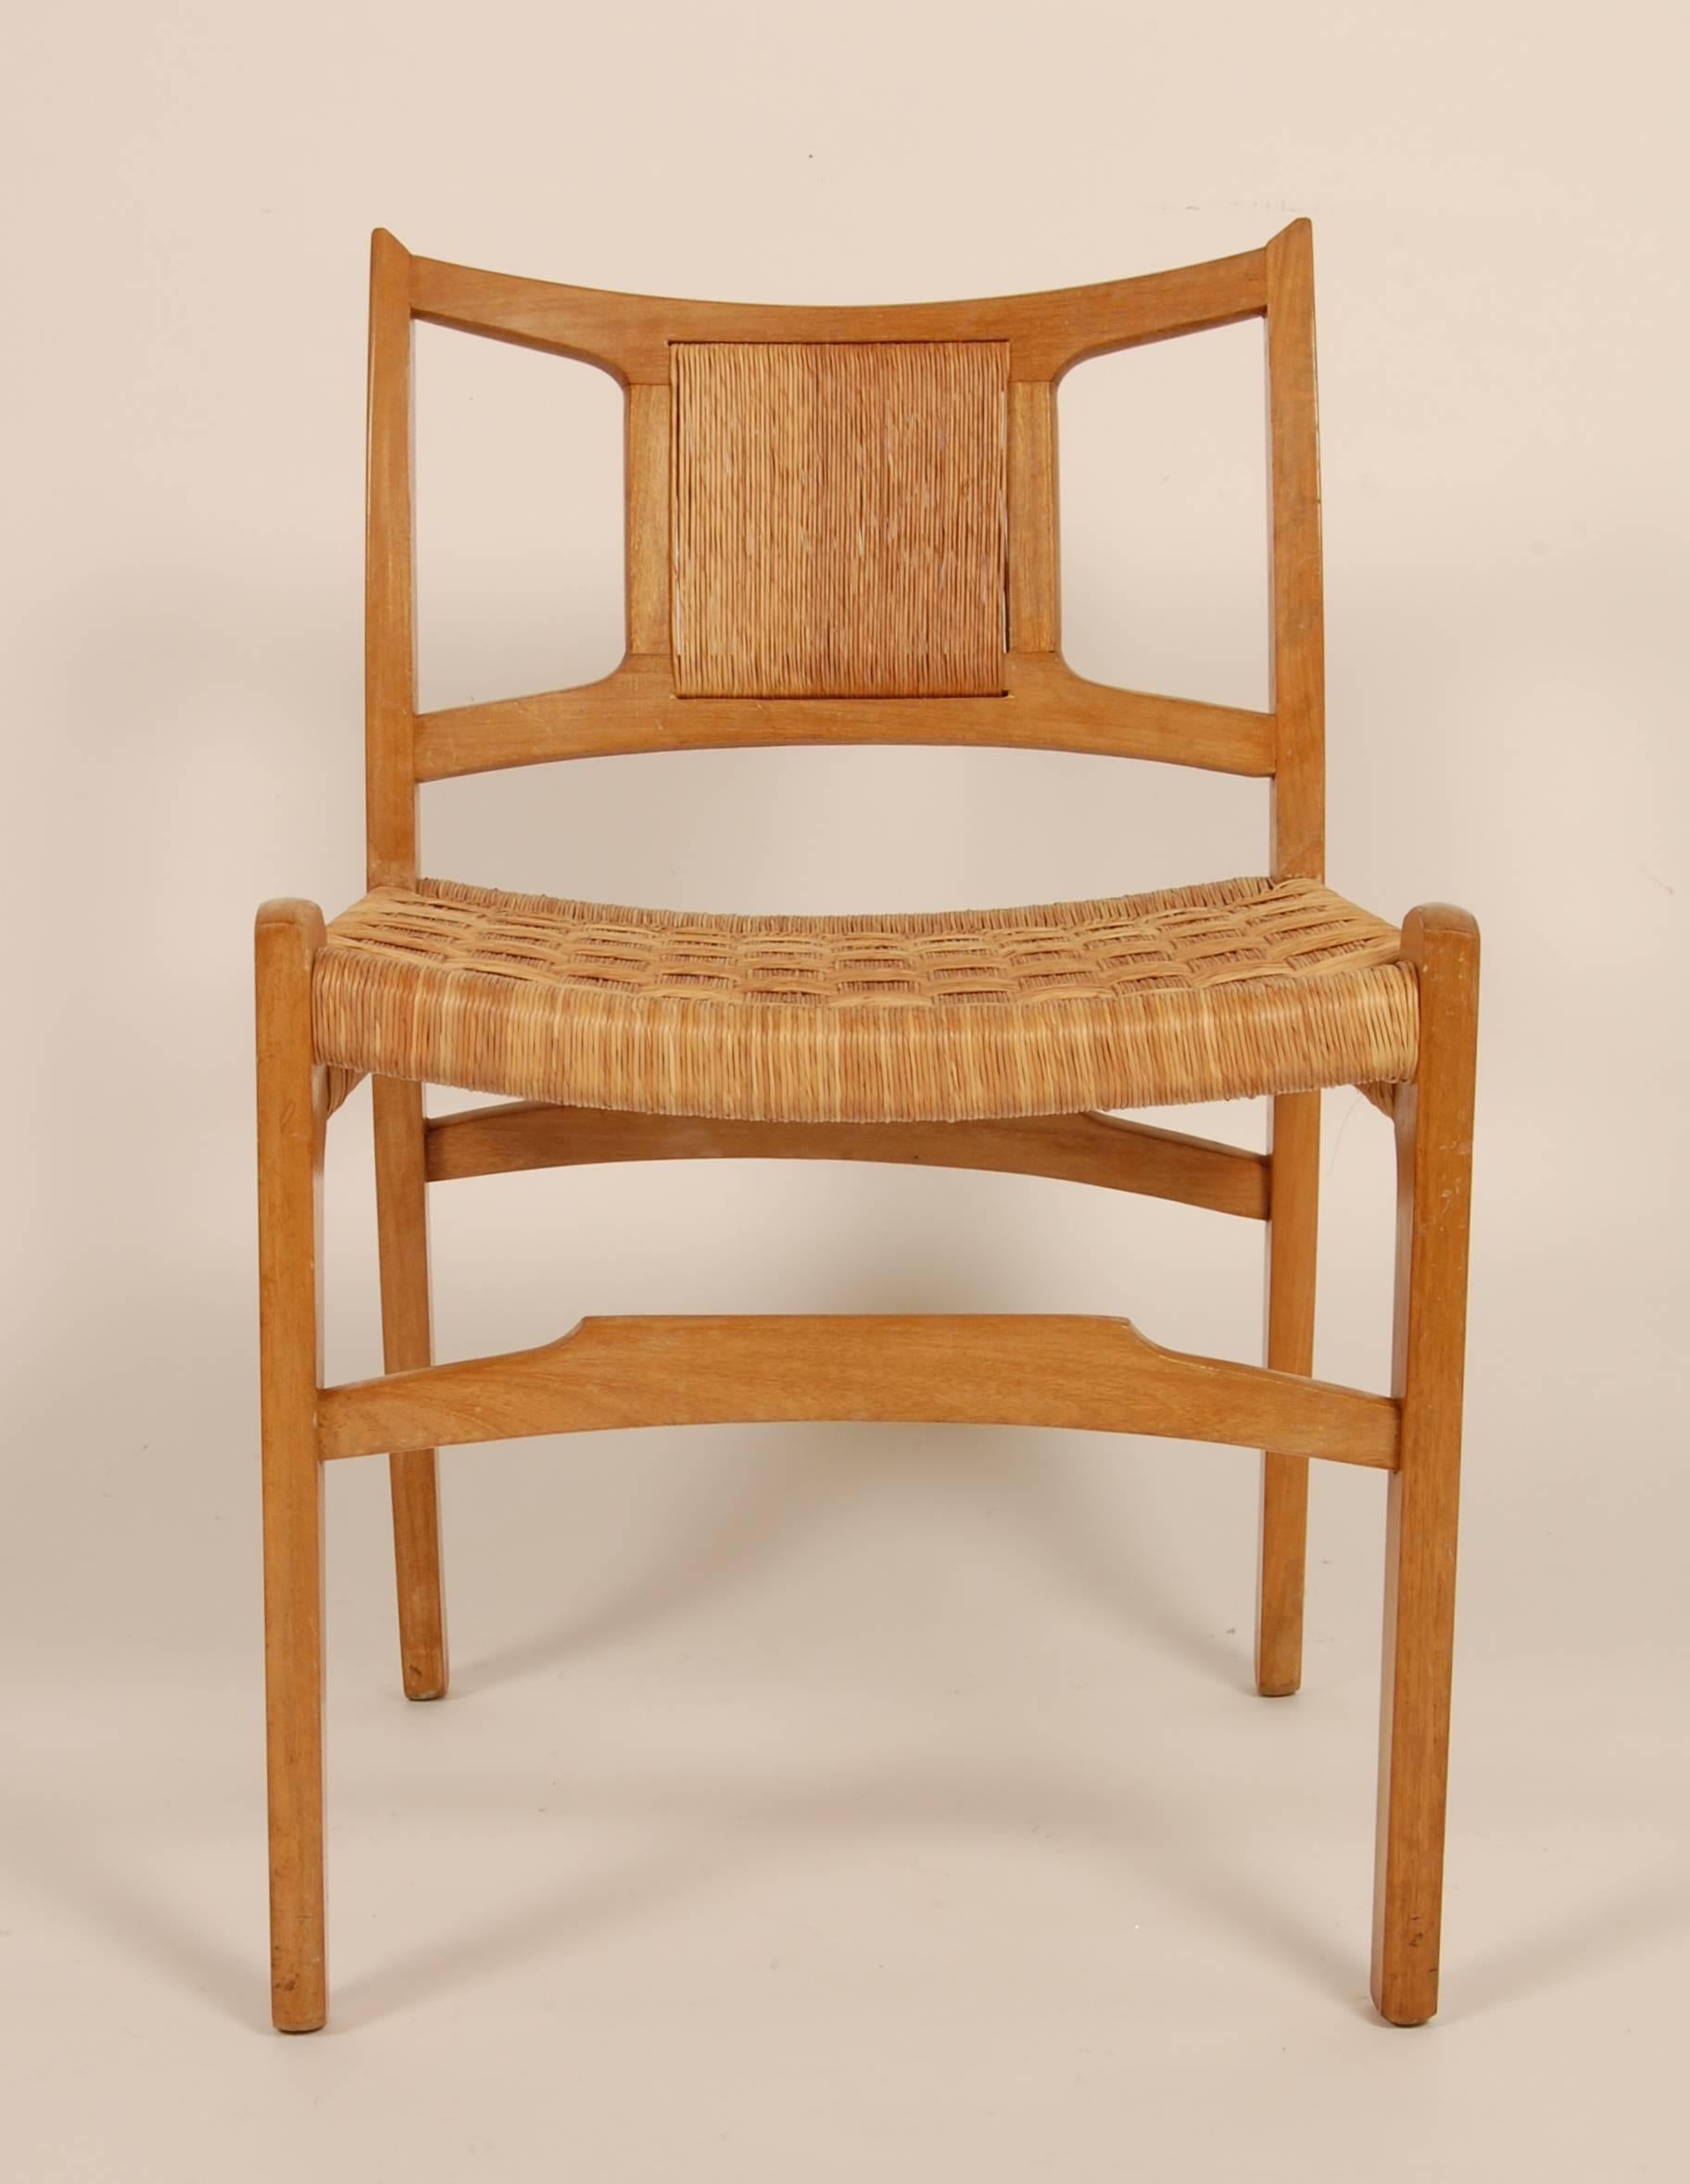 Side chair designed by Edmond Spence for Industria Mueblera fo Mexico, circa 1950s, constructed of blonde mahogany with a jute sit and back, beautiful all original condition. 